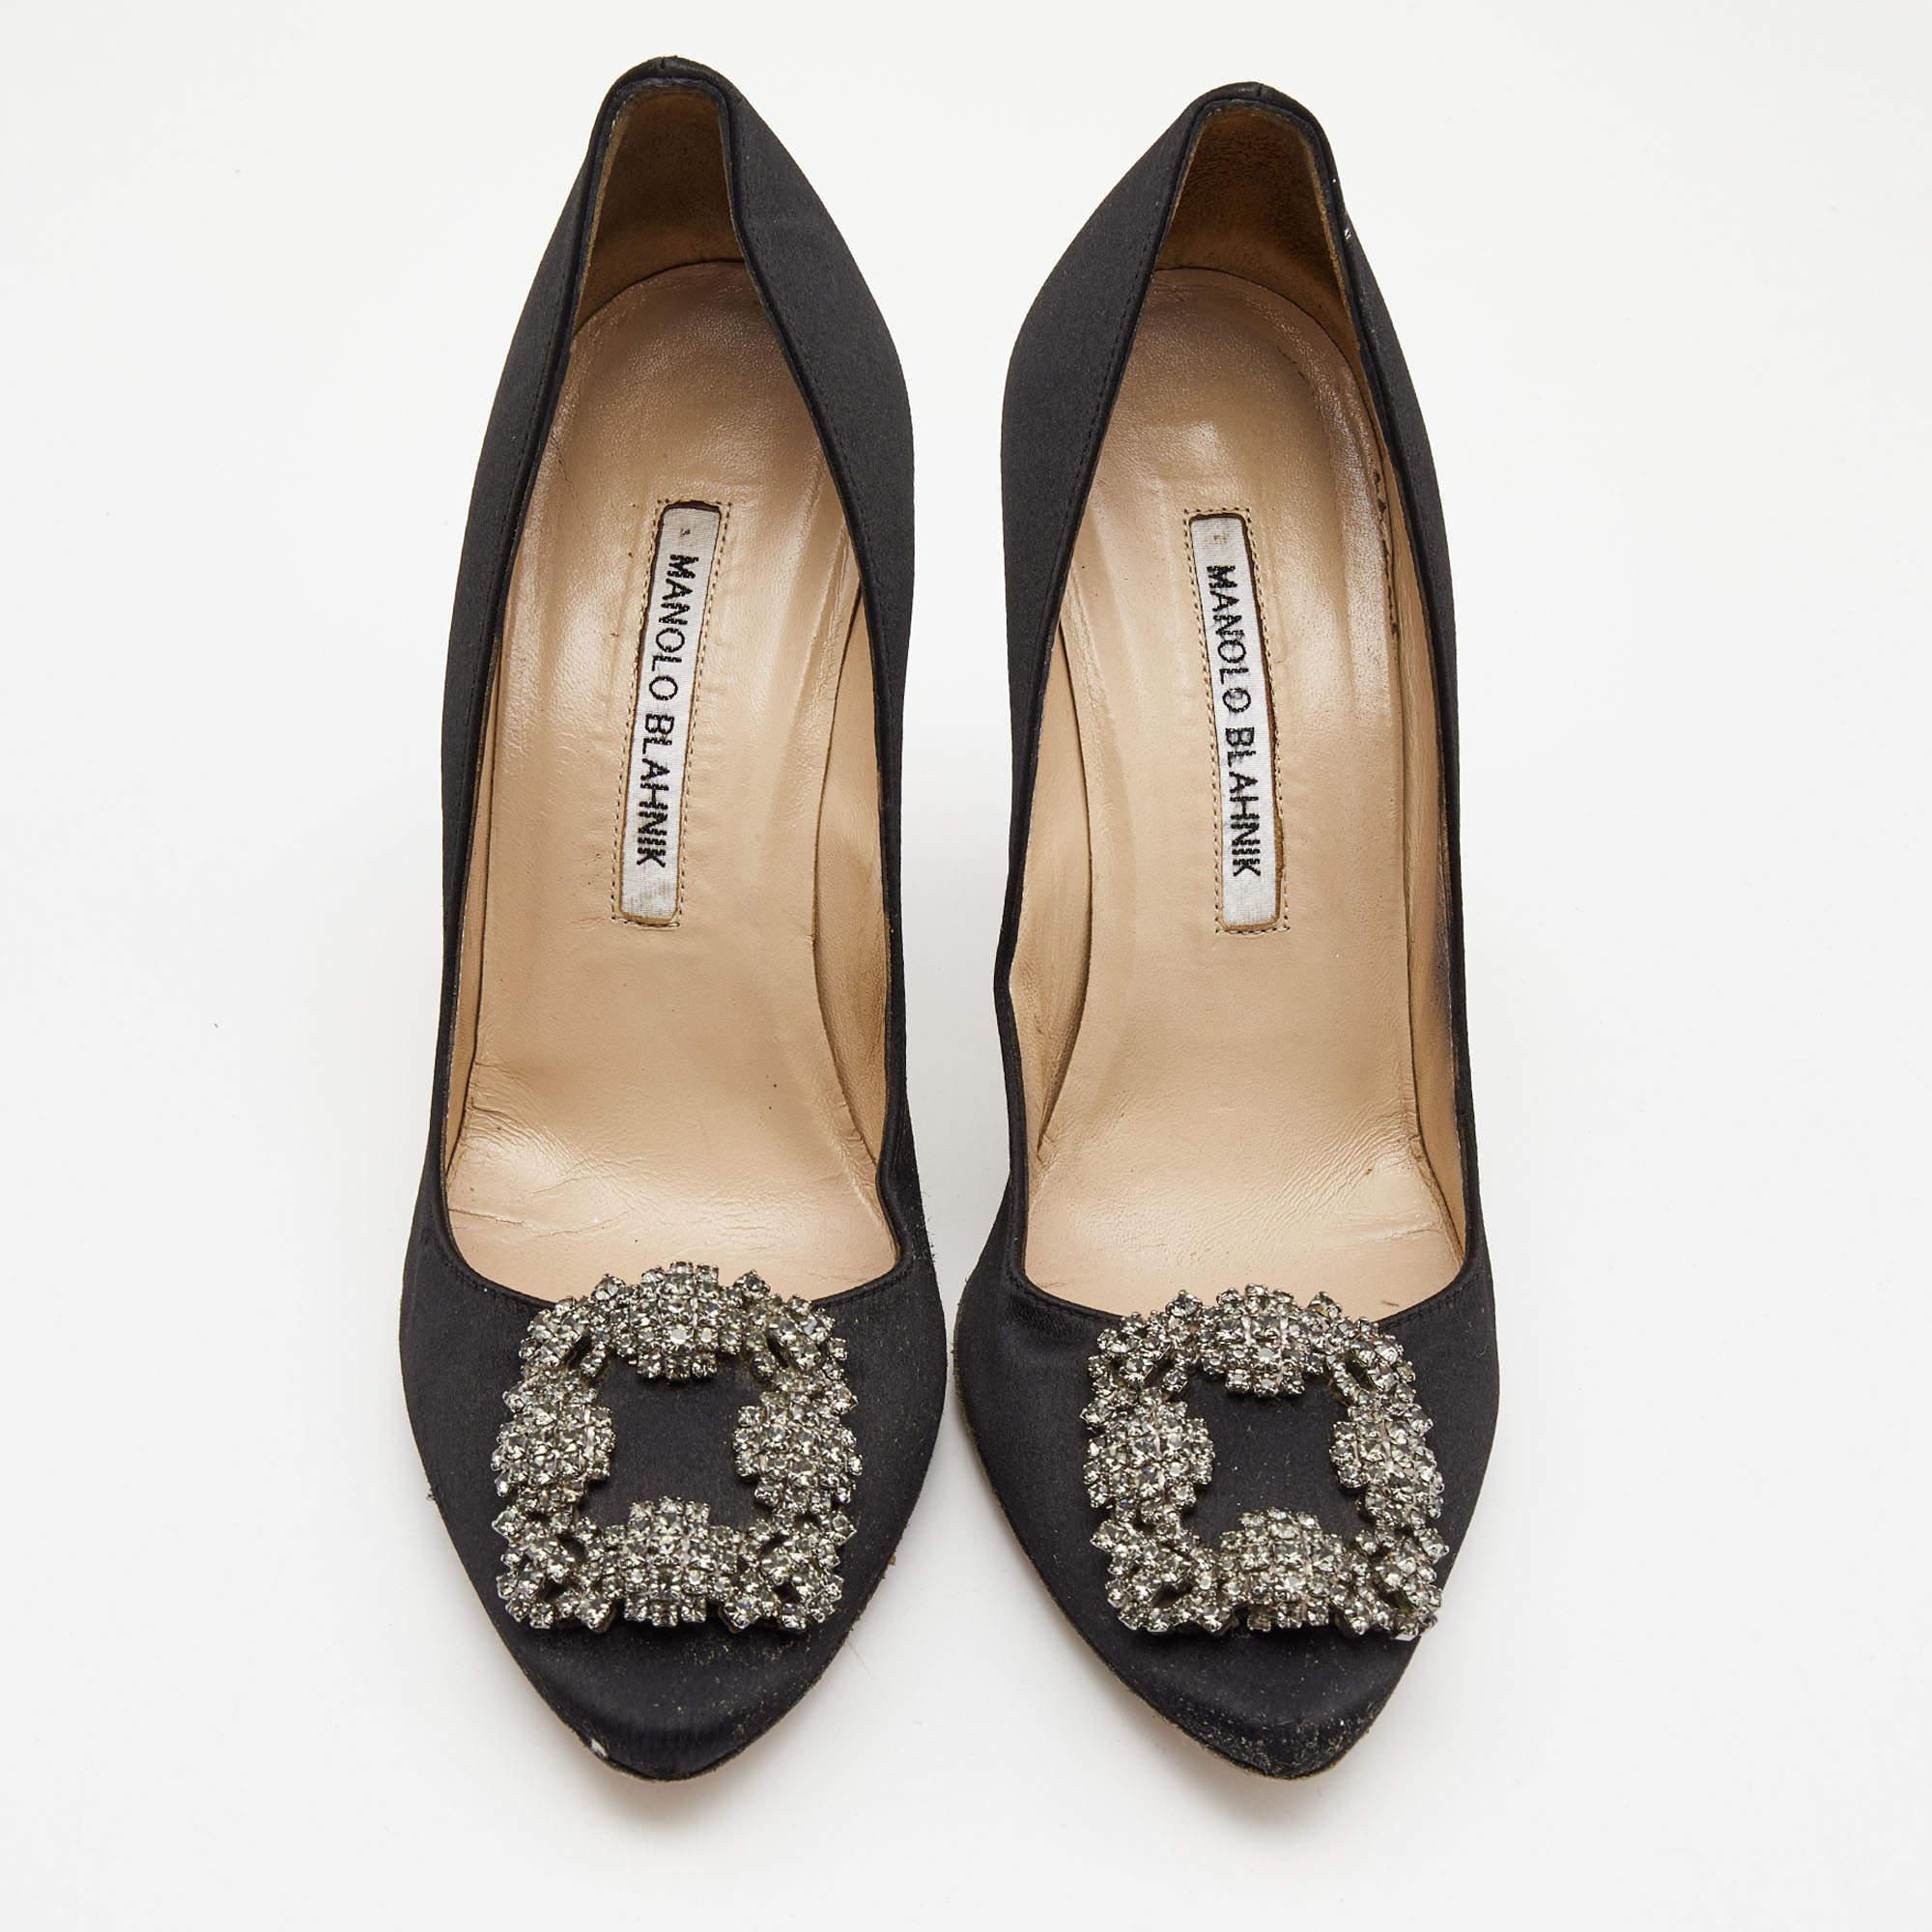 Manolo Blahnik is well-known for his graceful designs, and his label is synonymous with opulence, femininity, and elegance. These Hangisi pumps are crafted into a pointed-toe silhouette augmented by the embellishments perched on the uppers. They are